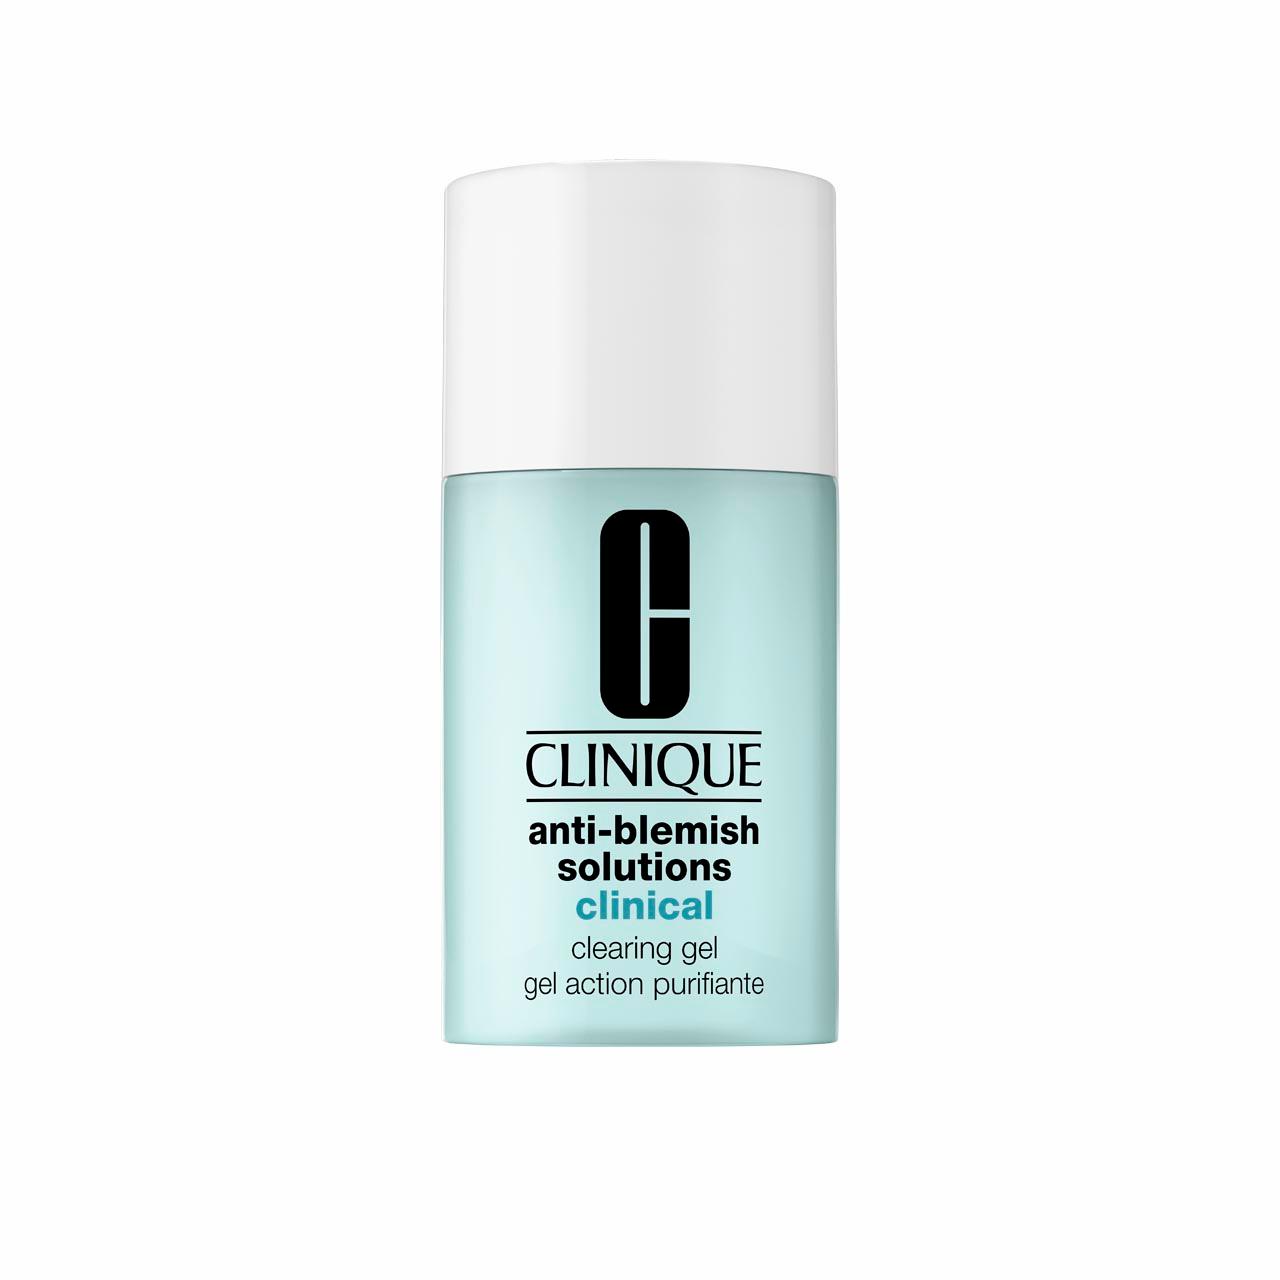 CLINIQUE | CLINIQUE Anti-Blemish Solutions Clinical Clearing Gel (30ml)